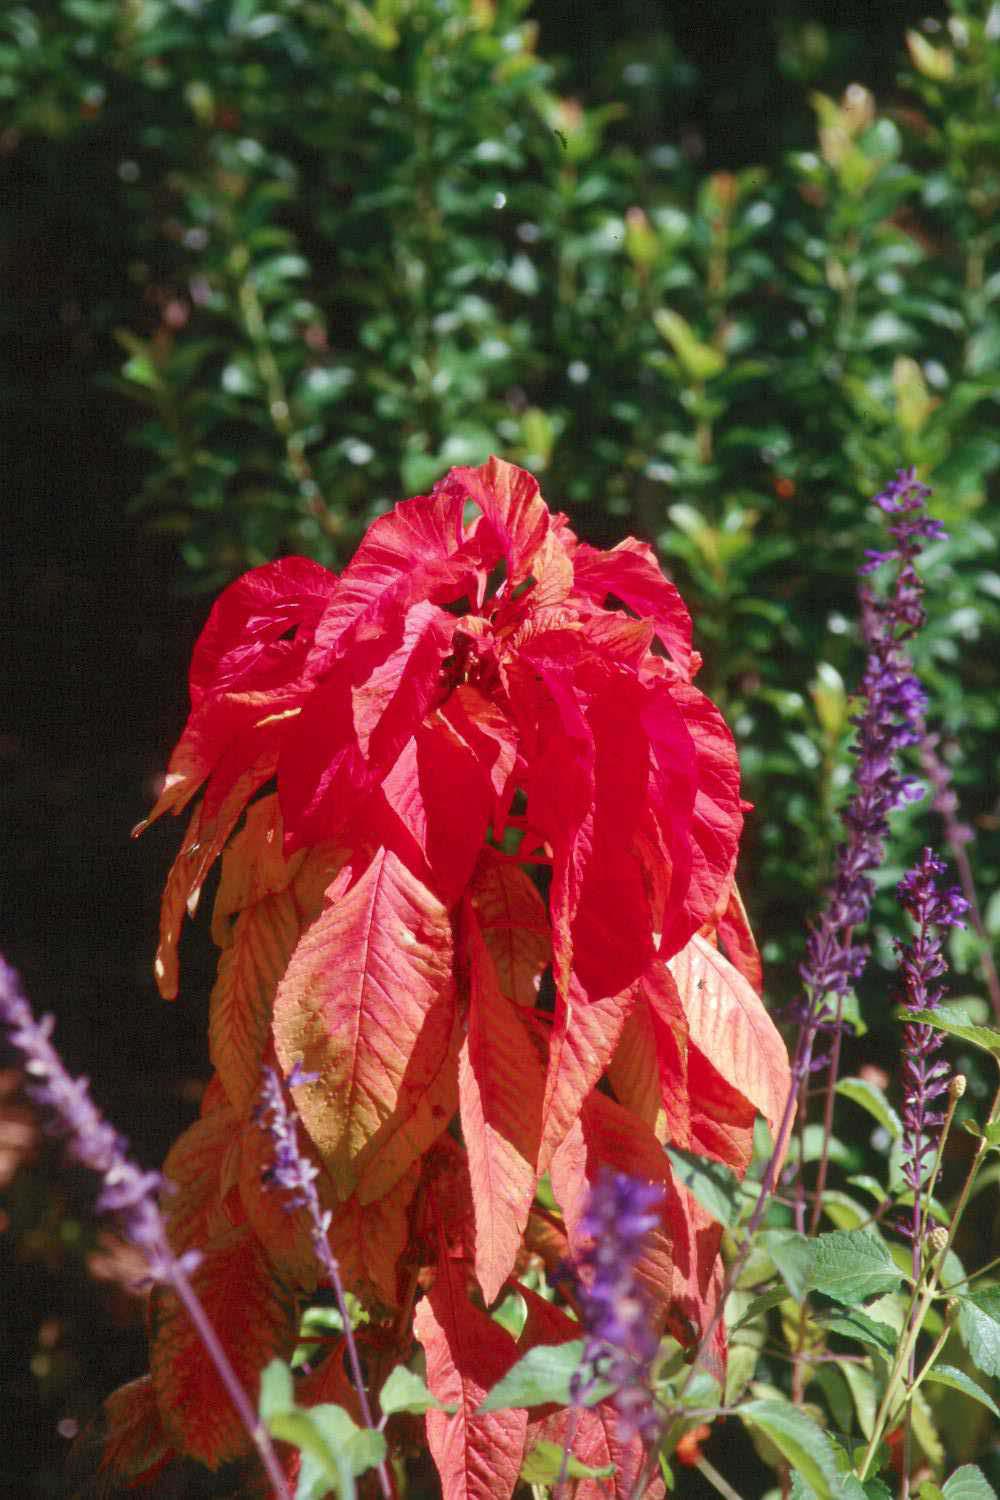 Botanically, the summer poinsettia is Amaranthus tricolor, also known as Joseph's Coat.